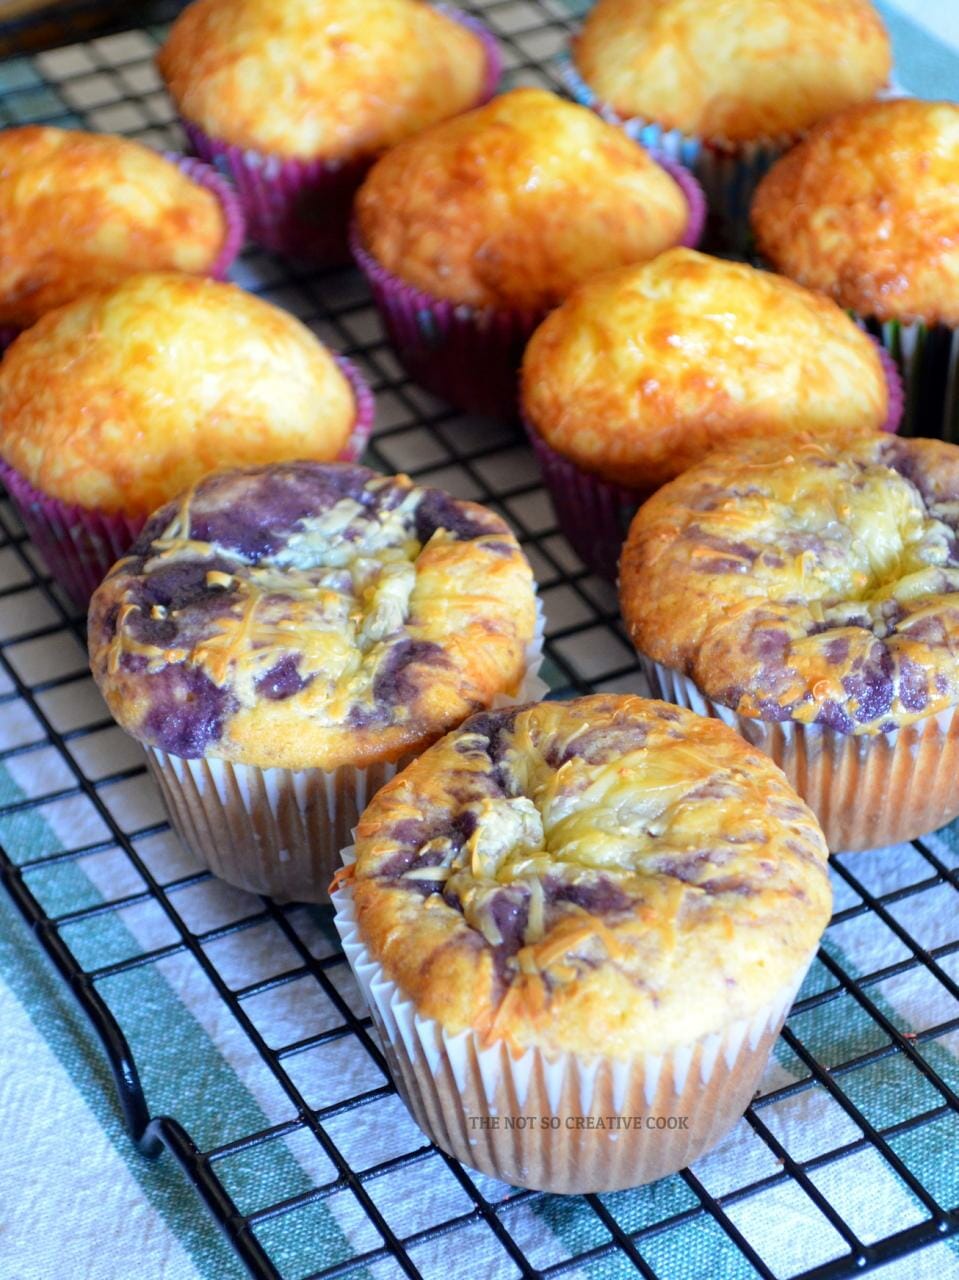 VIDEO} Filipino Cheese Cupcakes with Ube - The Not So Creative Cook